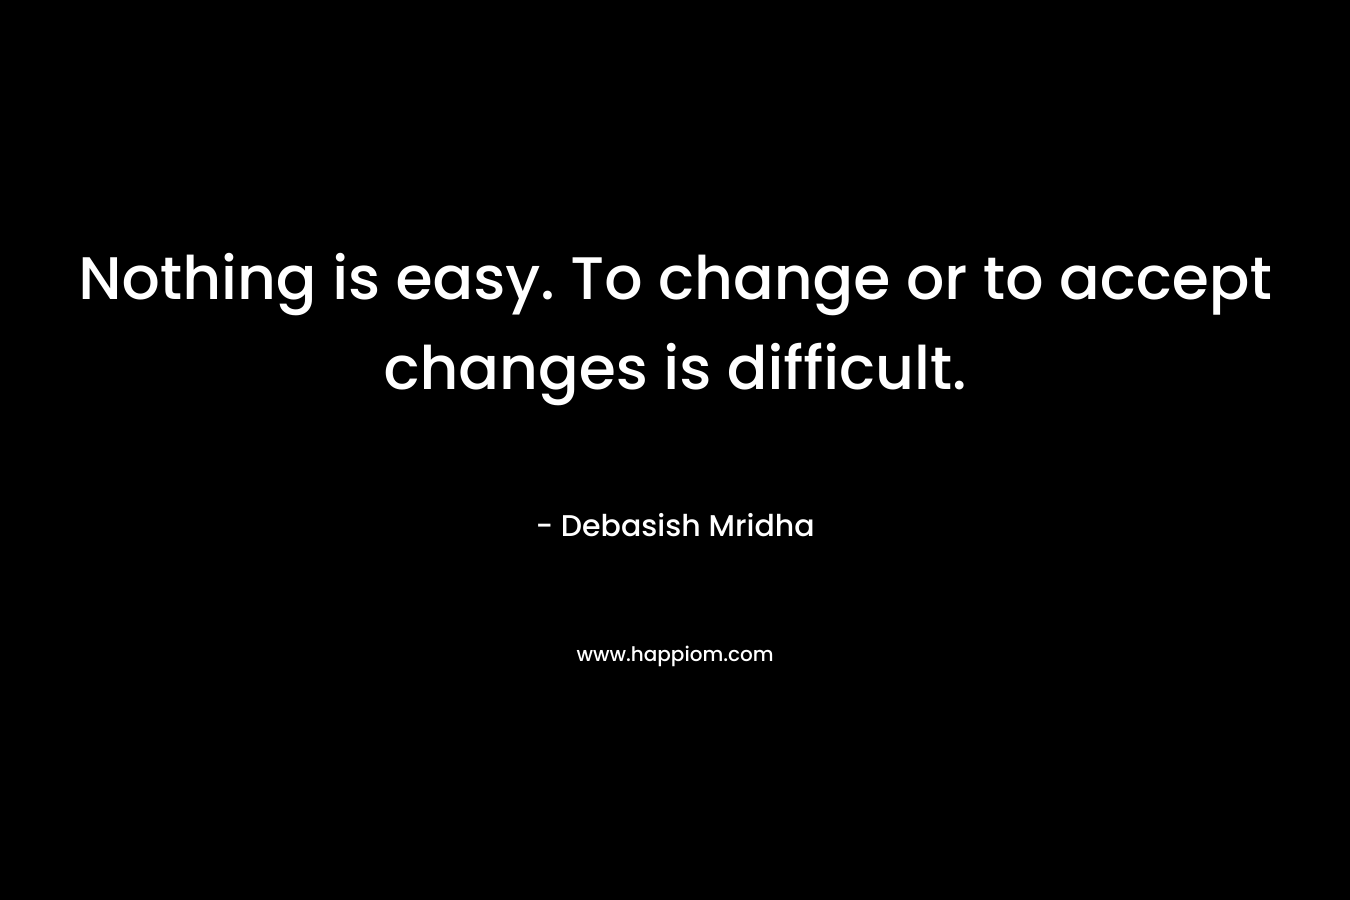 Nothing is easy. To change or to accept changes is difficult.